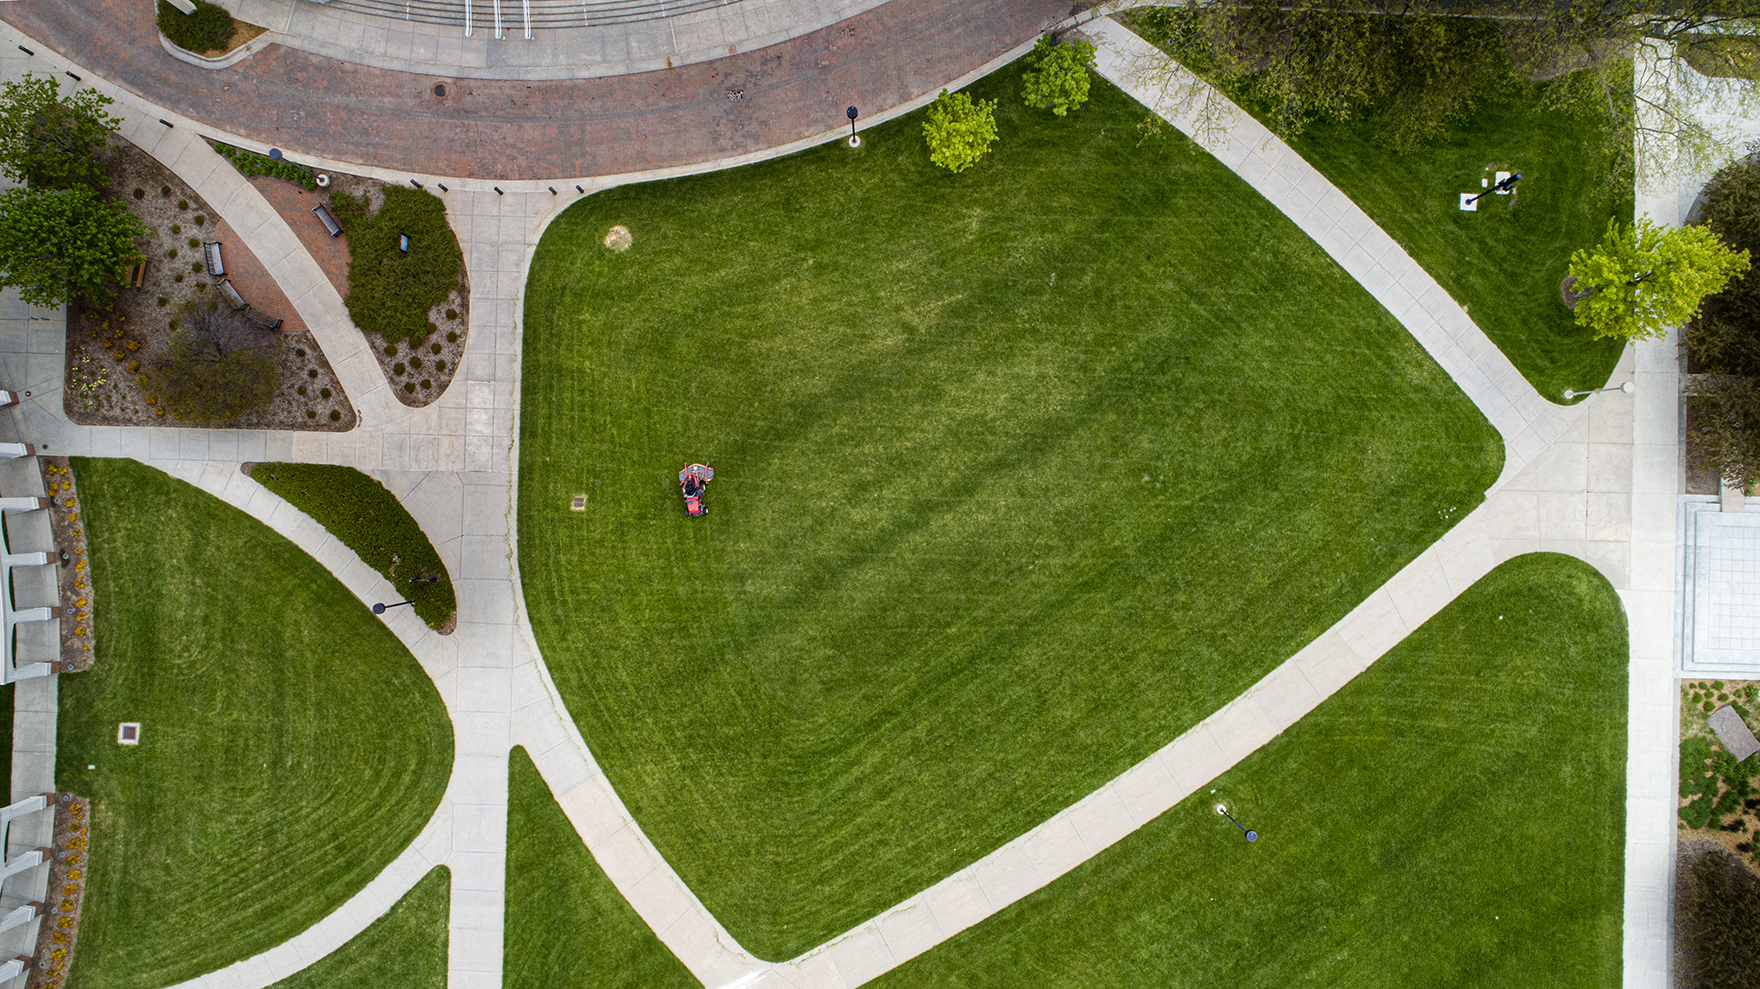 A Landscape Services employee mows the green space west of the Van Brunt Visitors Center. The university's landscape team has maintained momentum through the COVID-19 pandemic, observing health protocols while also maintaining campus grounds.